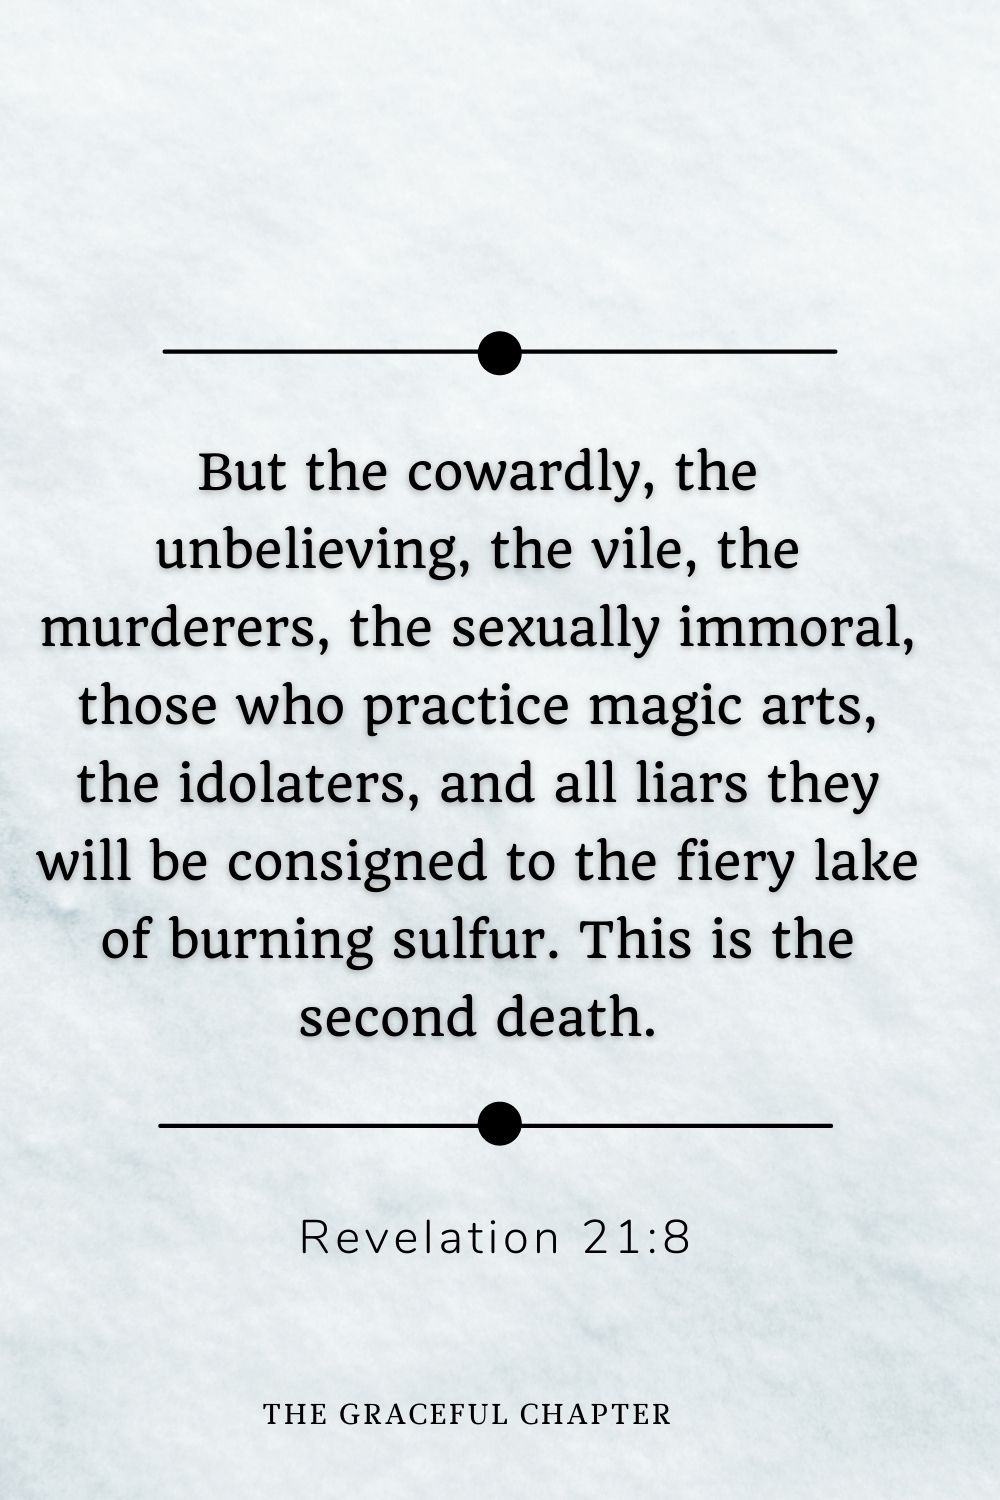 But the cowardly, the unbelieving, the vile, the murderers, the sexually immoral, those who practice magic arts, the idolaters, and all liars they will be consigned to the fiery lake of burning sulfur. This is the second death. Revelation 21:8